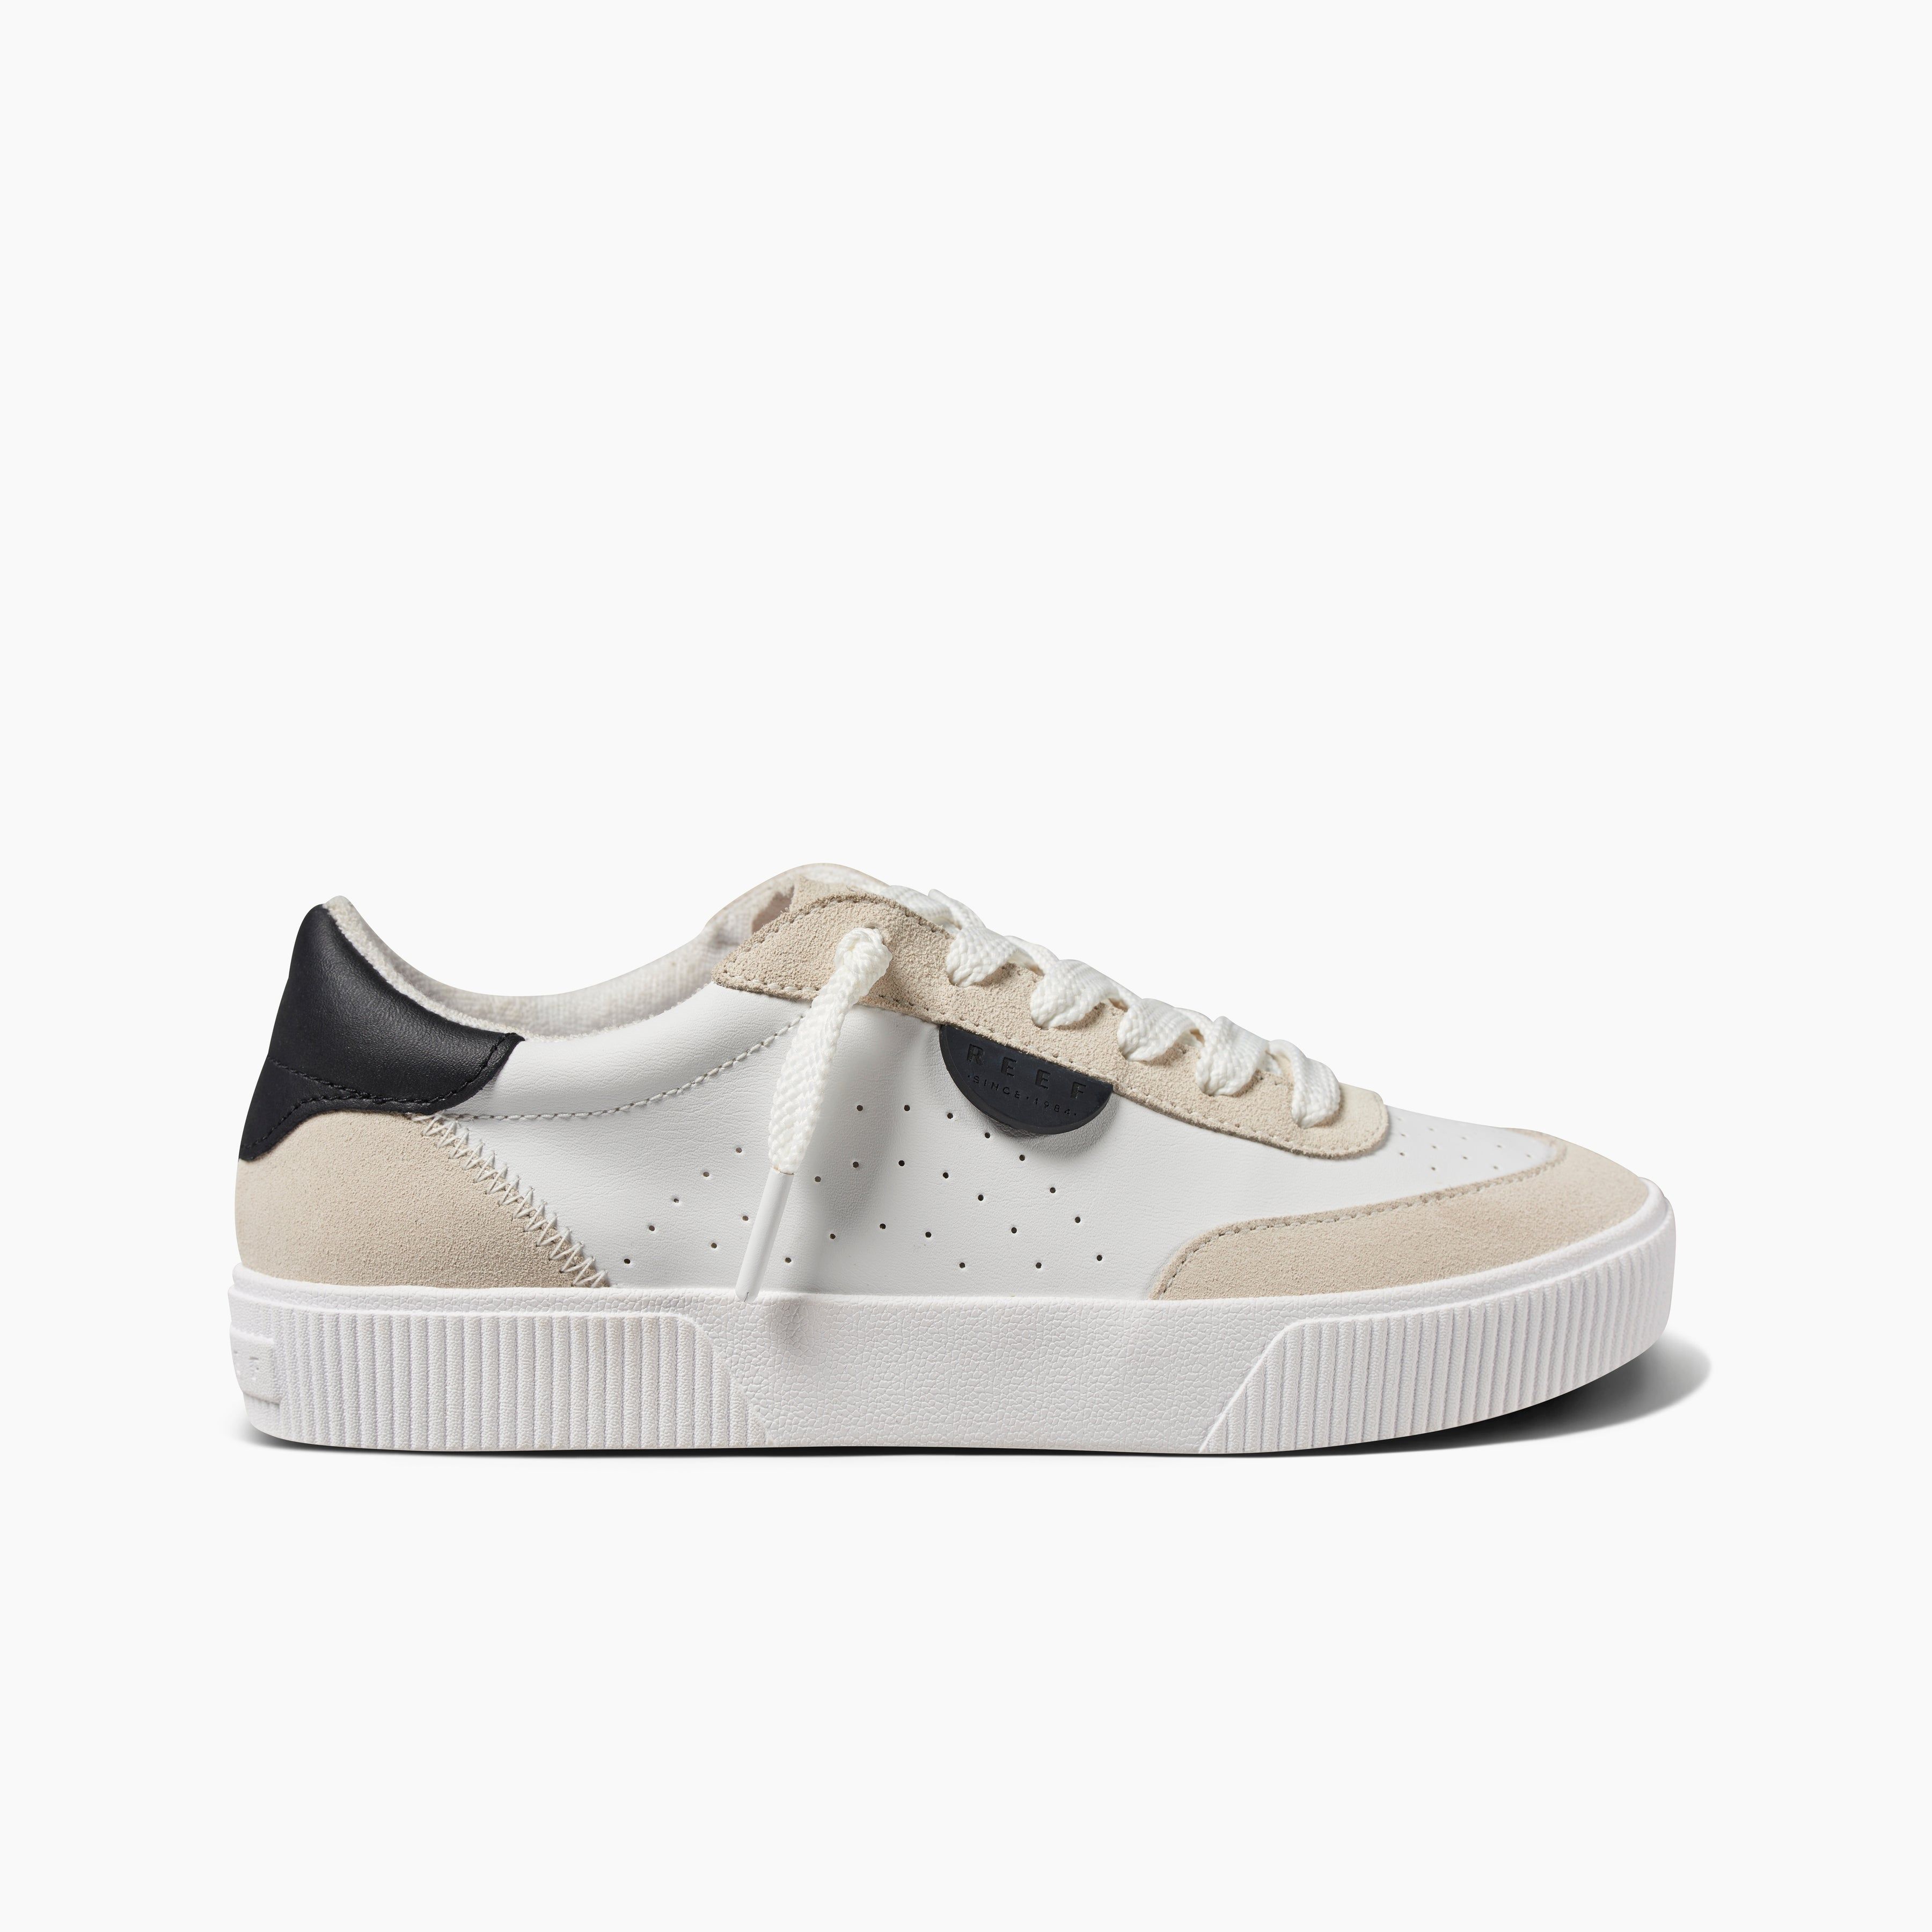 Women's Lay Day Seas Shoes in White Black Lese | REEF® | Reef